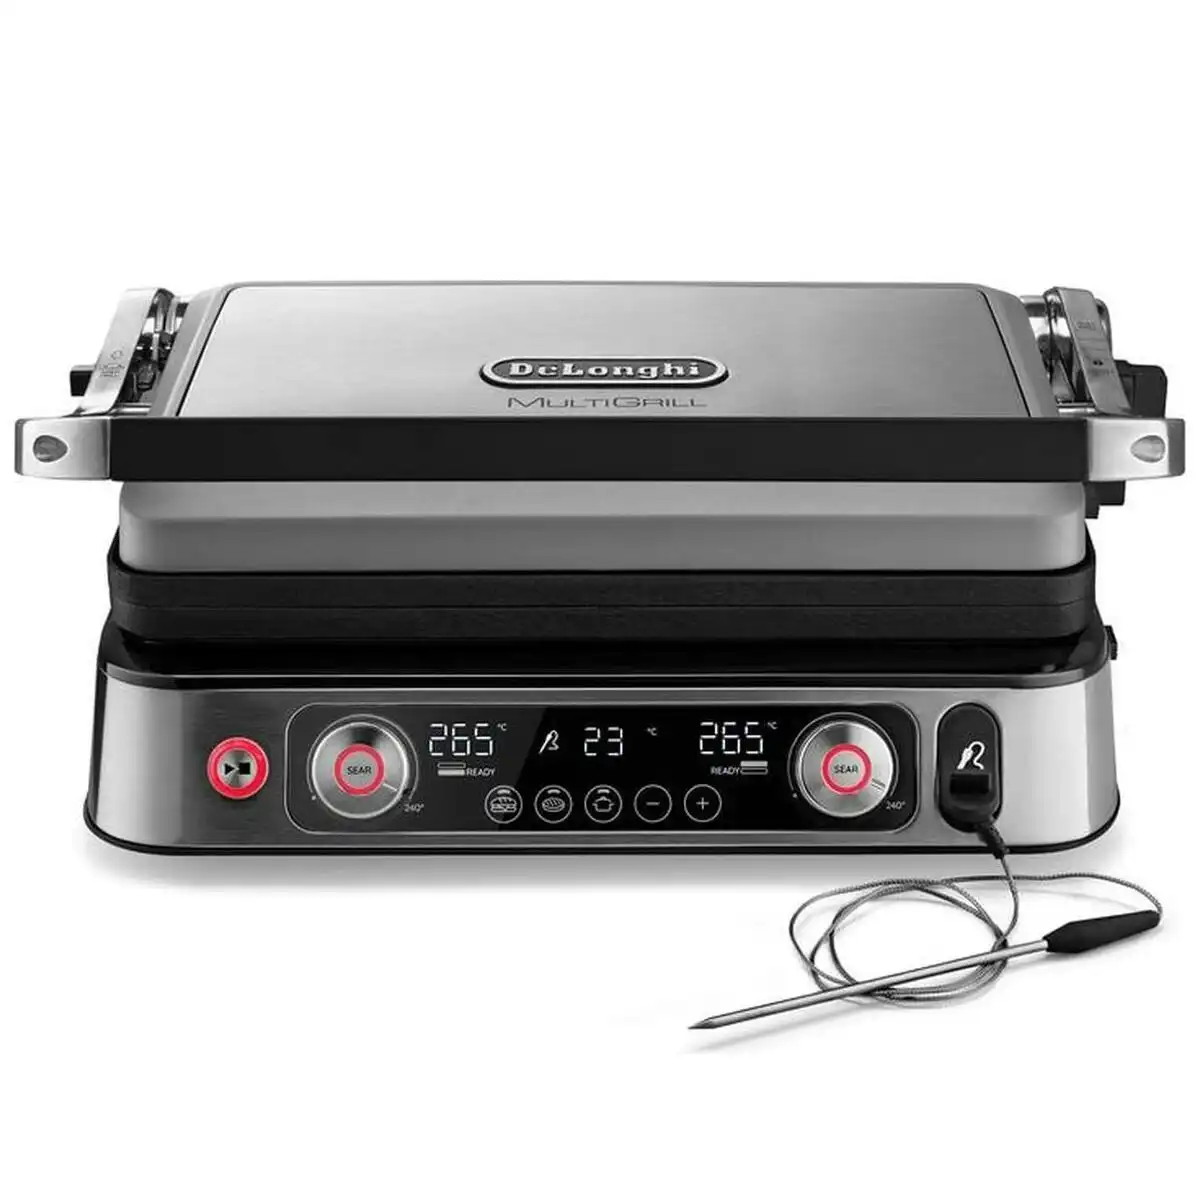 De'Longhi MultiGrill 1100 with ThermoProbe Contact Grill and BBQ